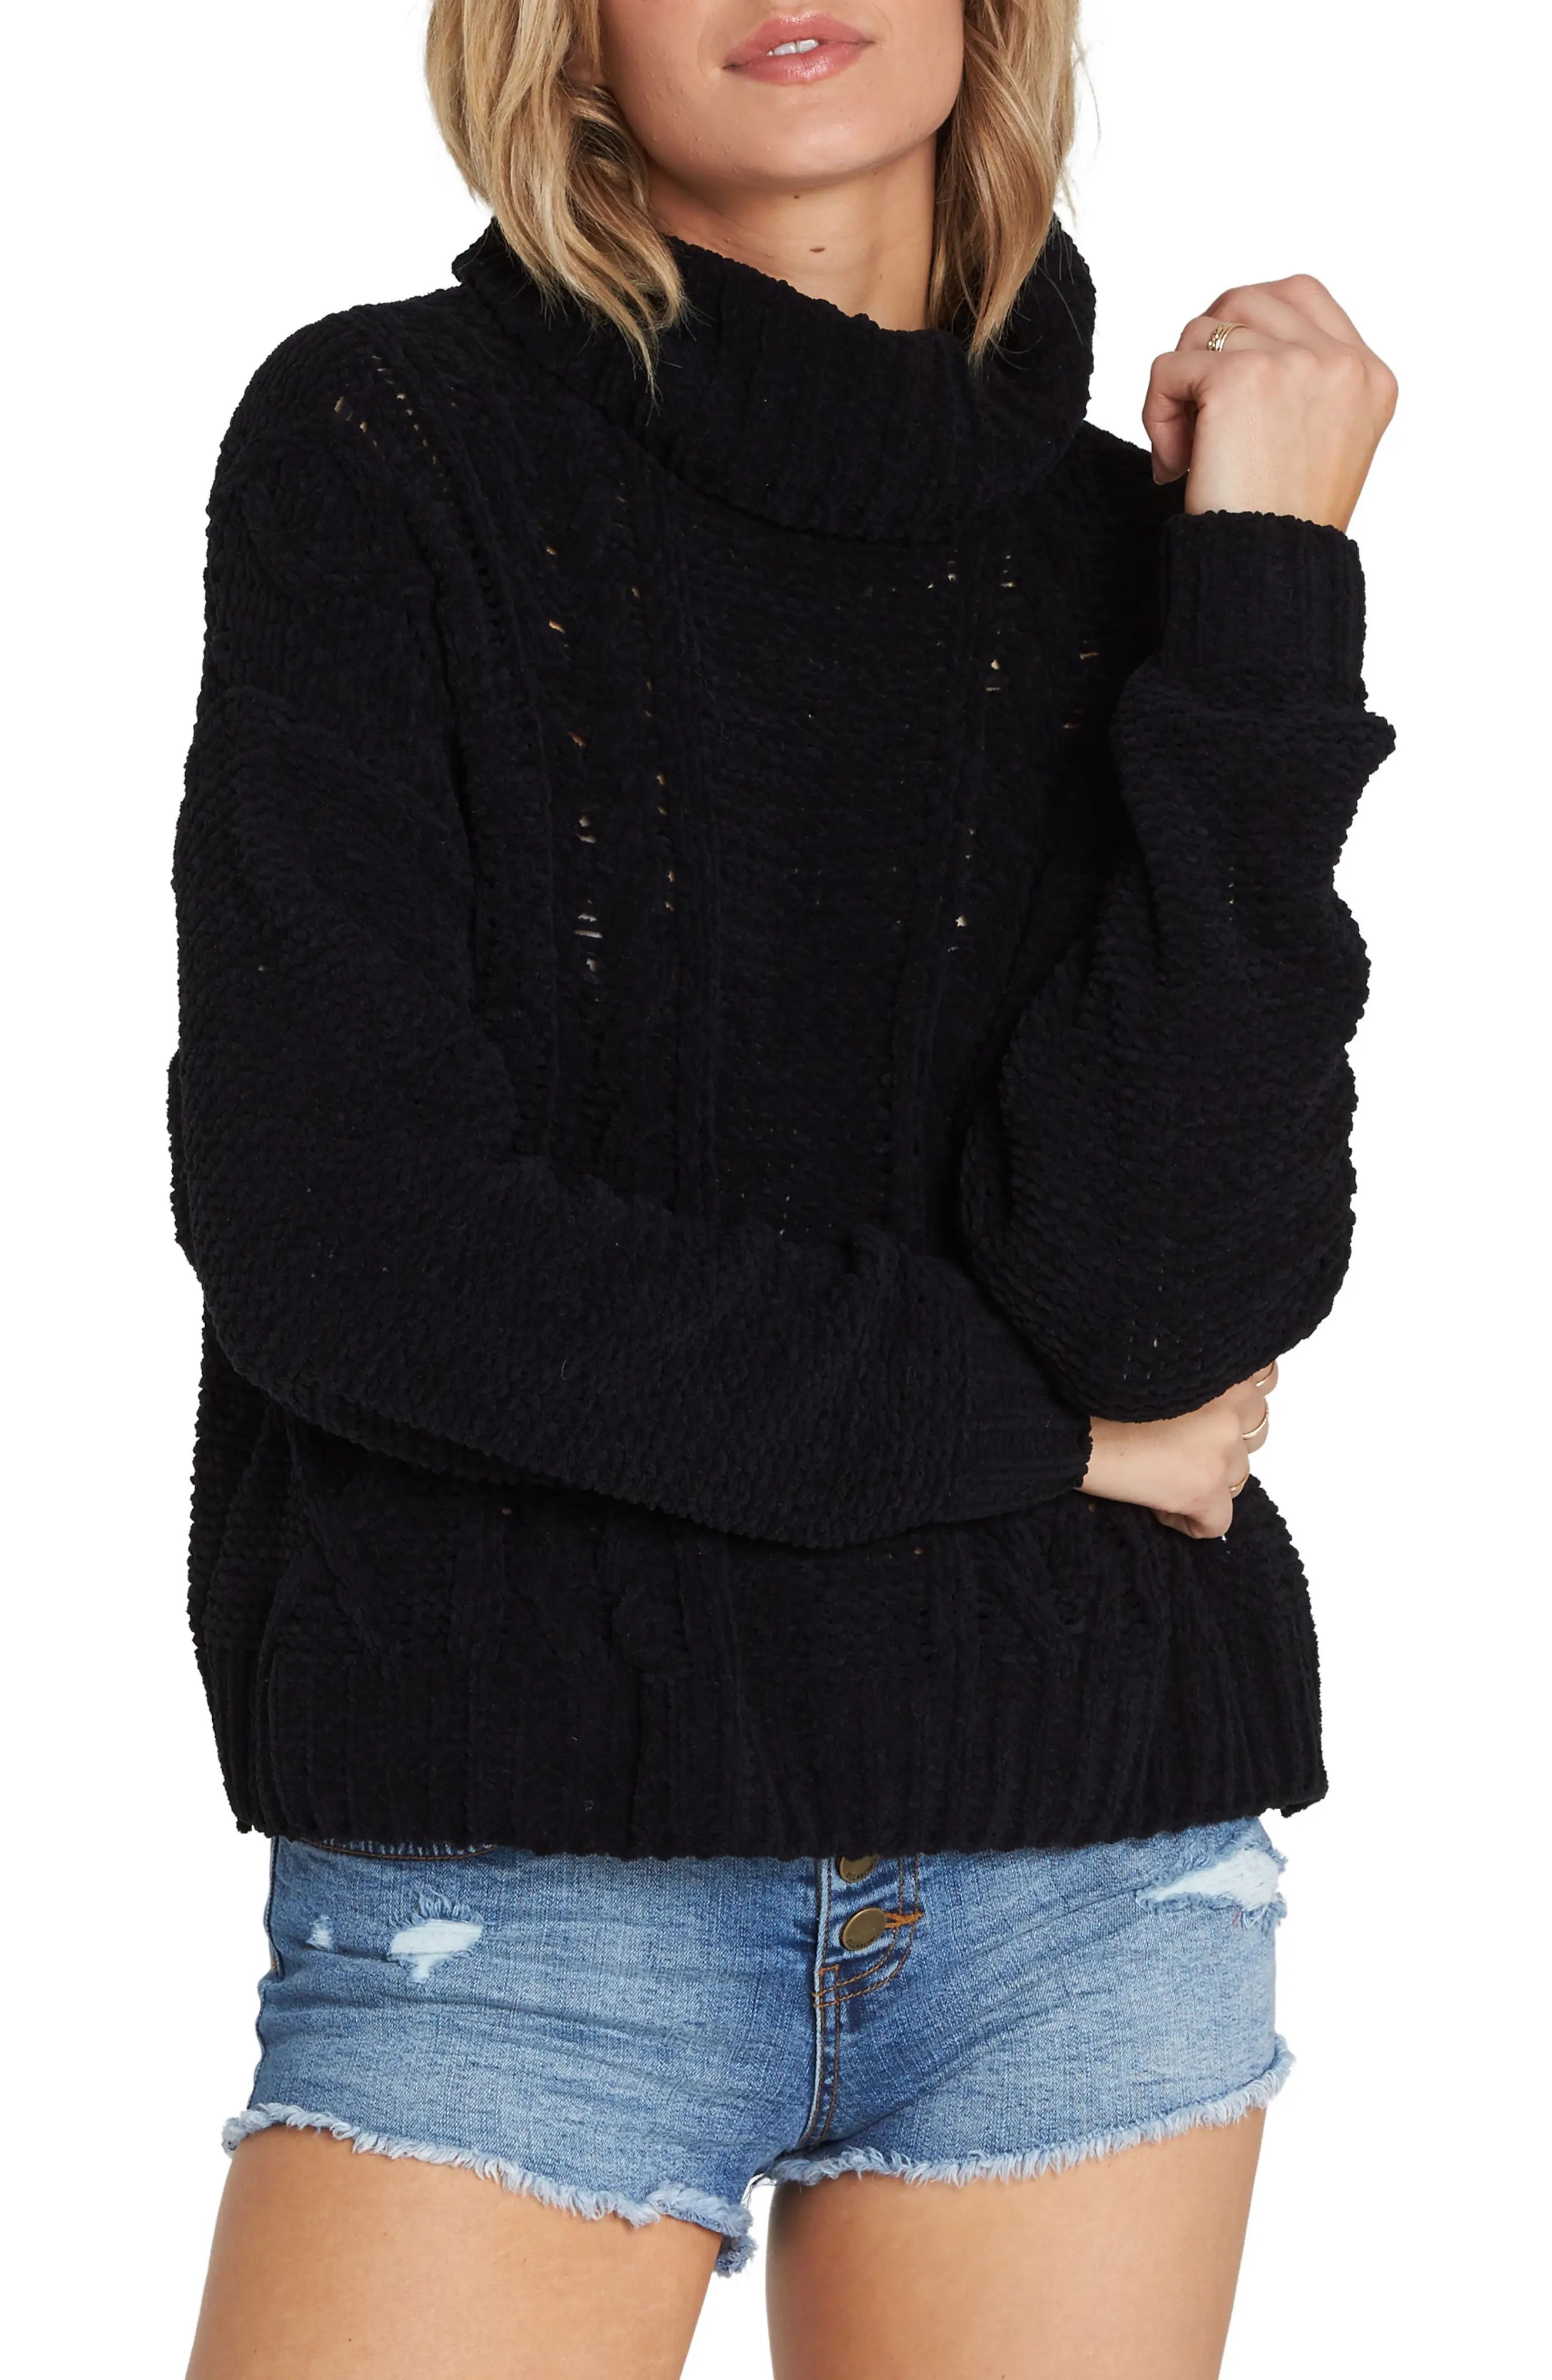 Cable Knit Turtleneck Sweater | Nordstrom